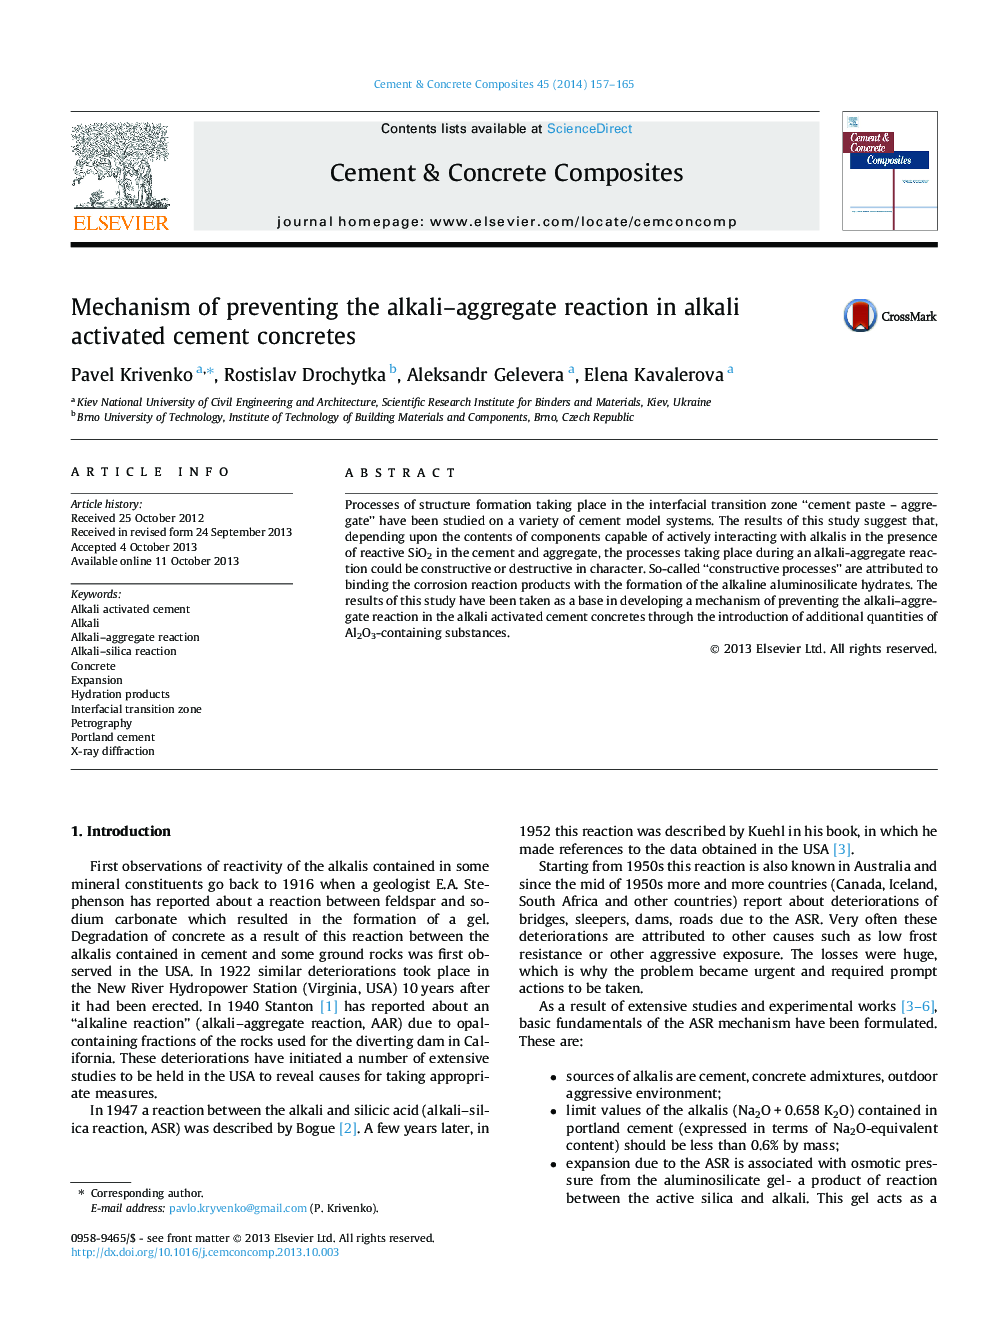 Mechanism of preventing the alkali–aggregate reaction in alkali activated cement concretes